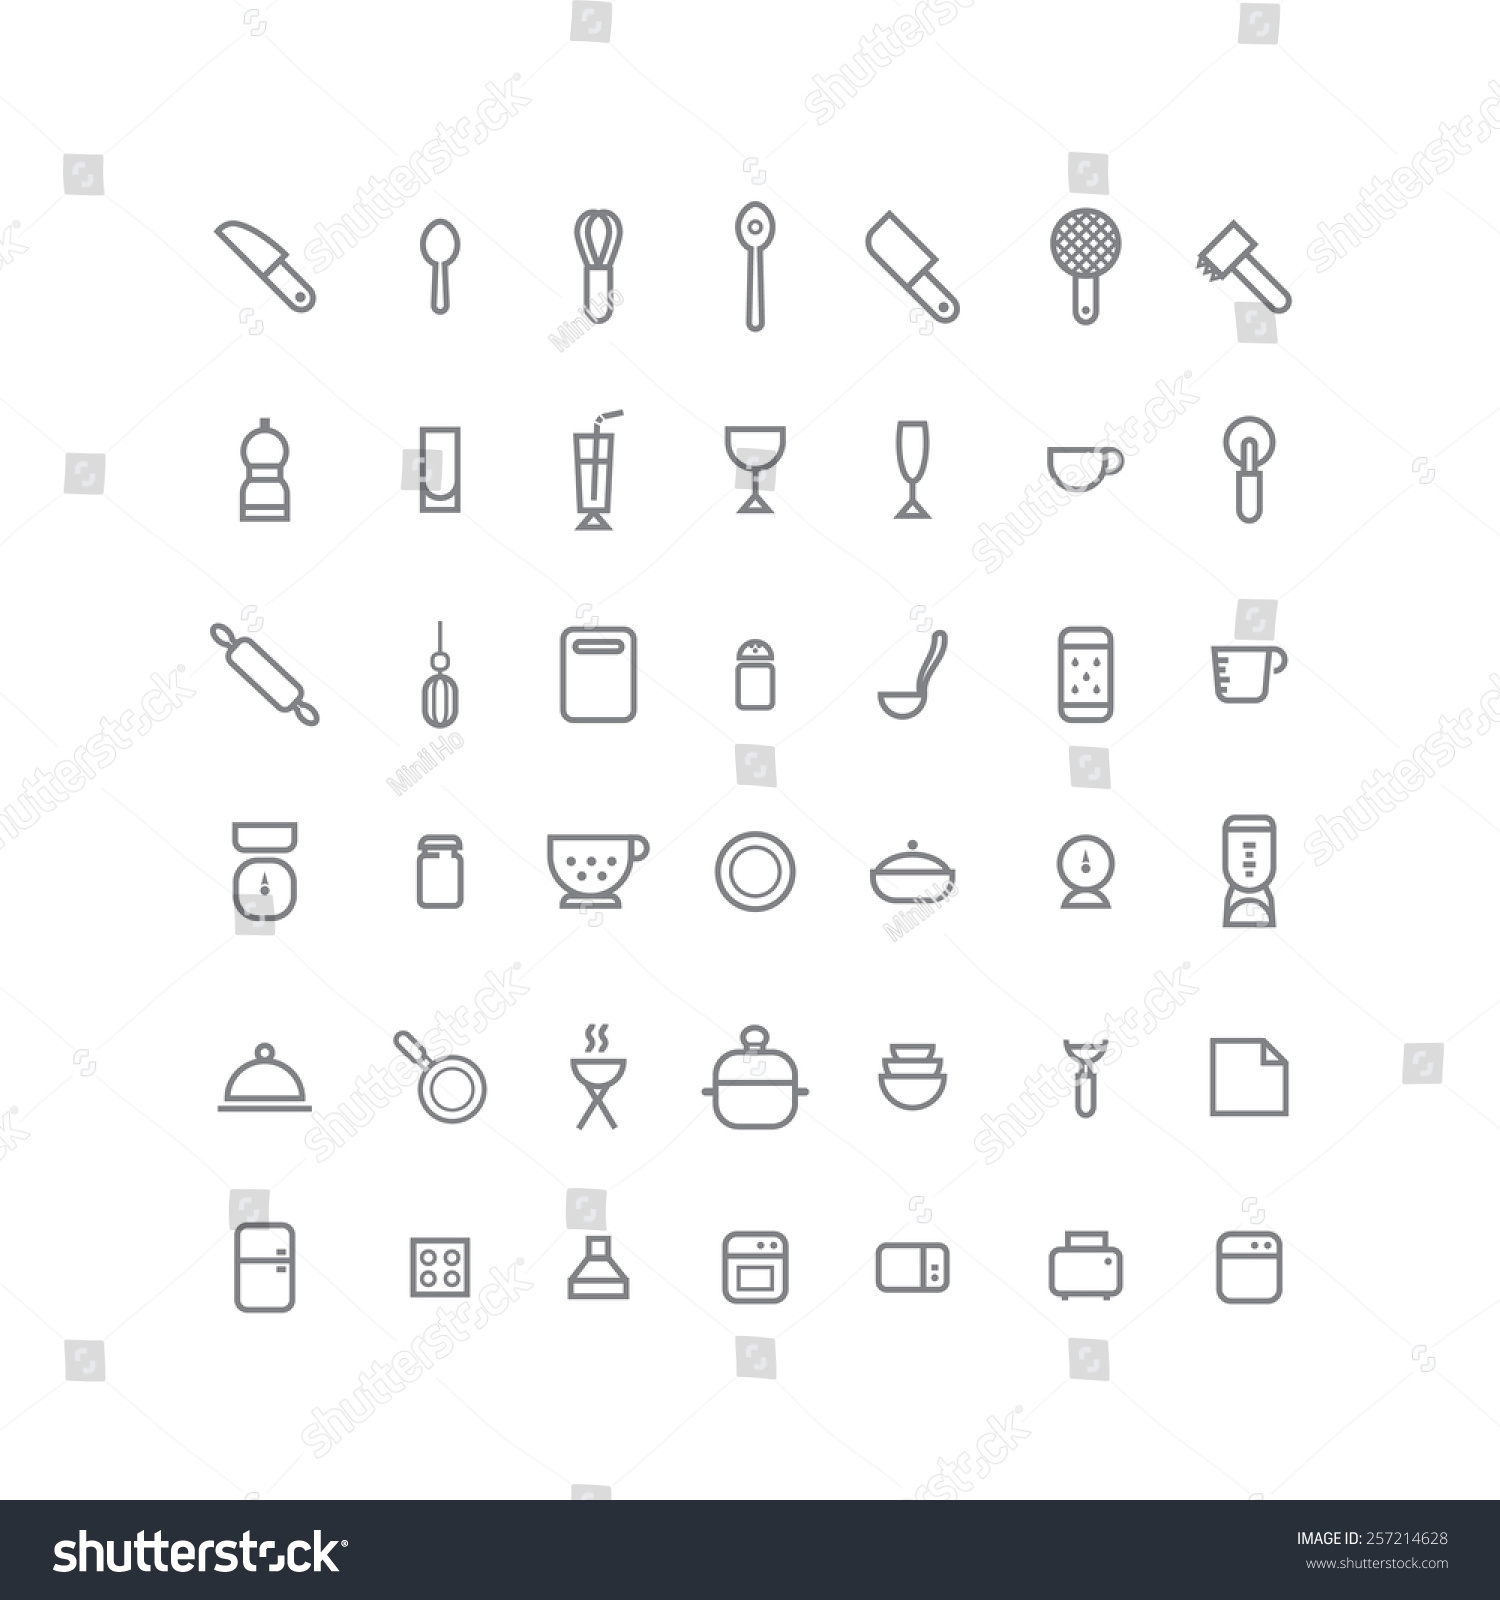 40 Big and Highly Detailed Free Icon Sets to Improve Your Designs 